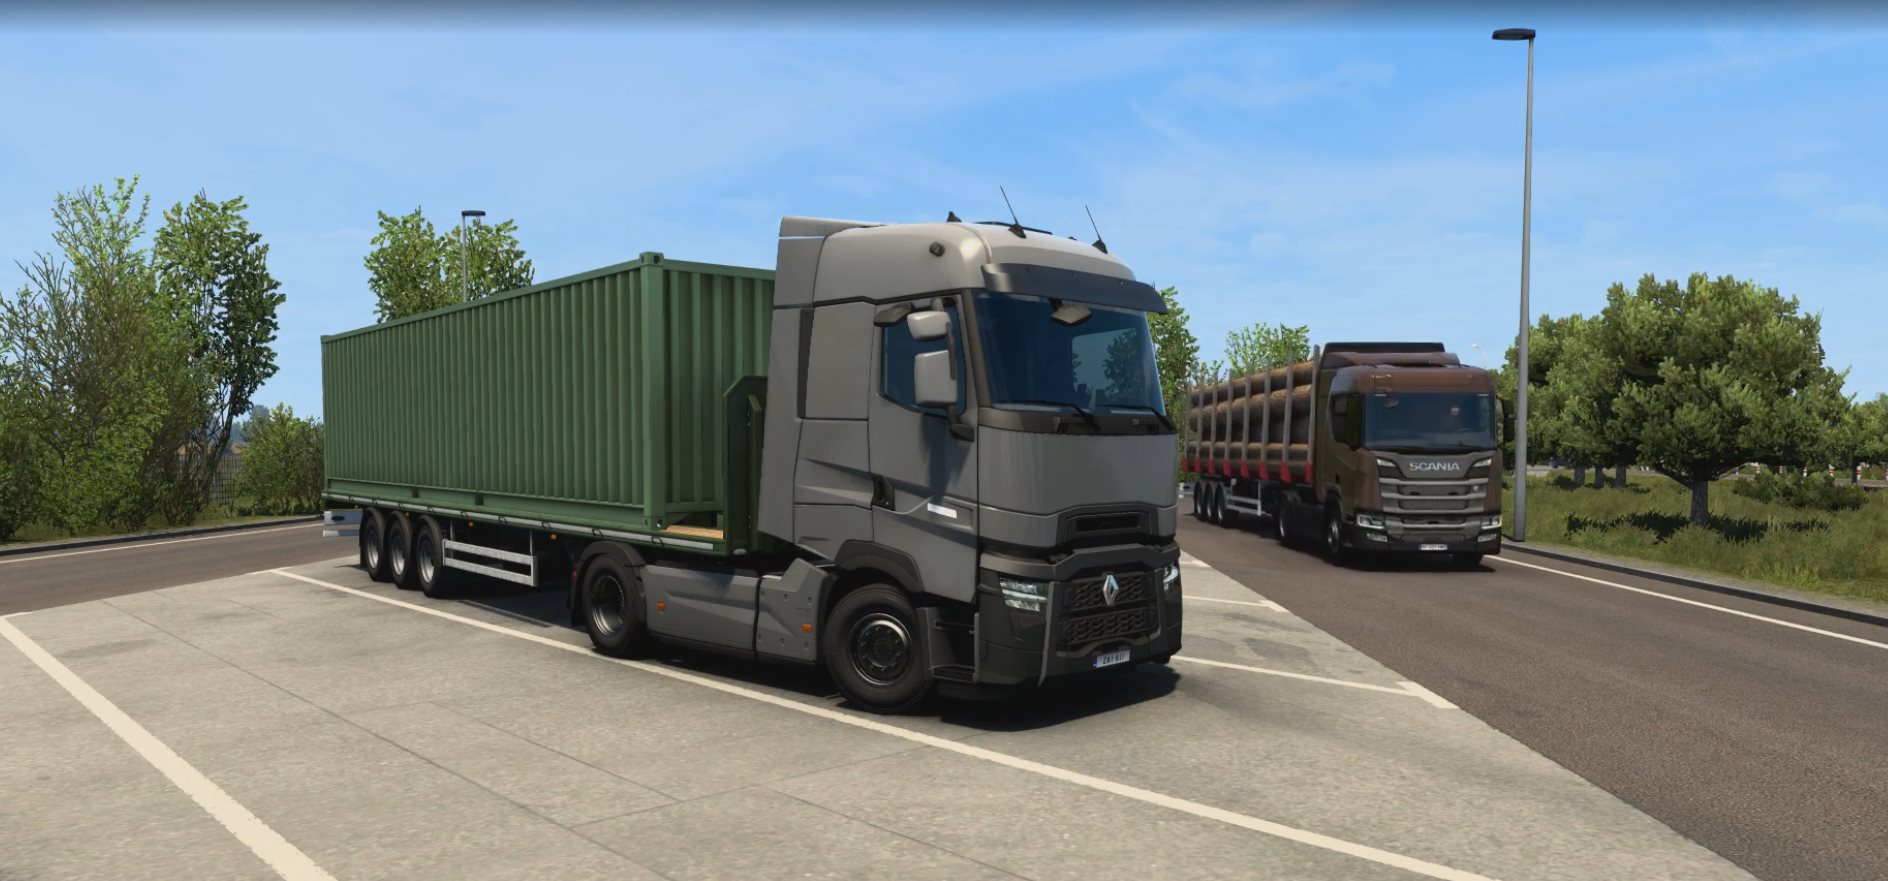 https://s1.cdn.autoevolution.com/images/news/renault-turns-to-euro-truck-simulator-2-to-launch-new-models-159164_1.jpg